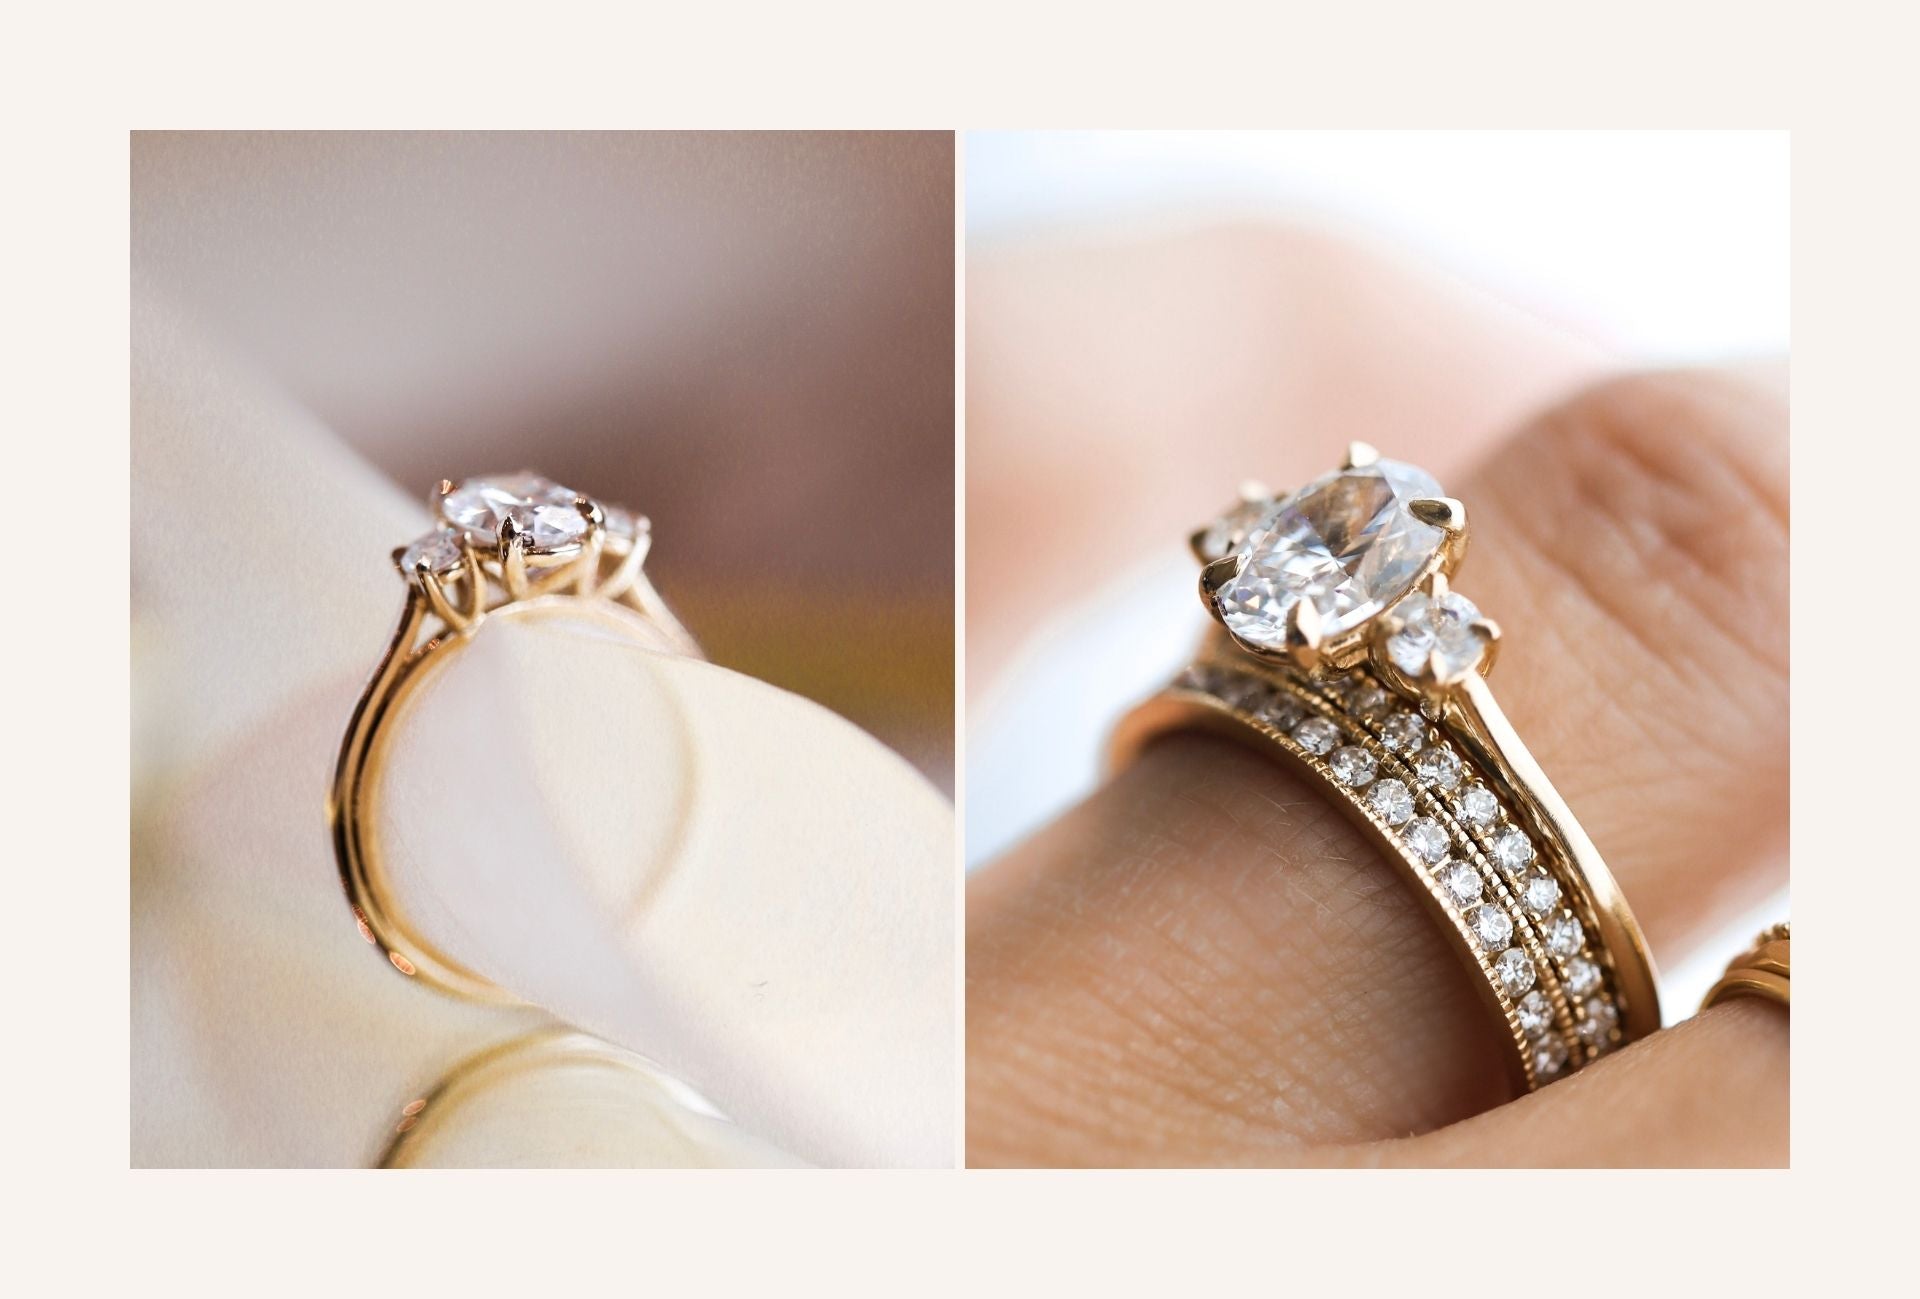 Does remodelling my engagement ring cost as much as buying a new one?